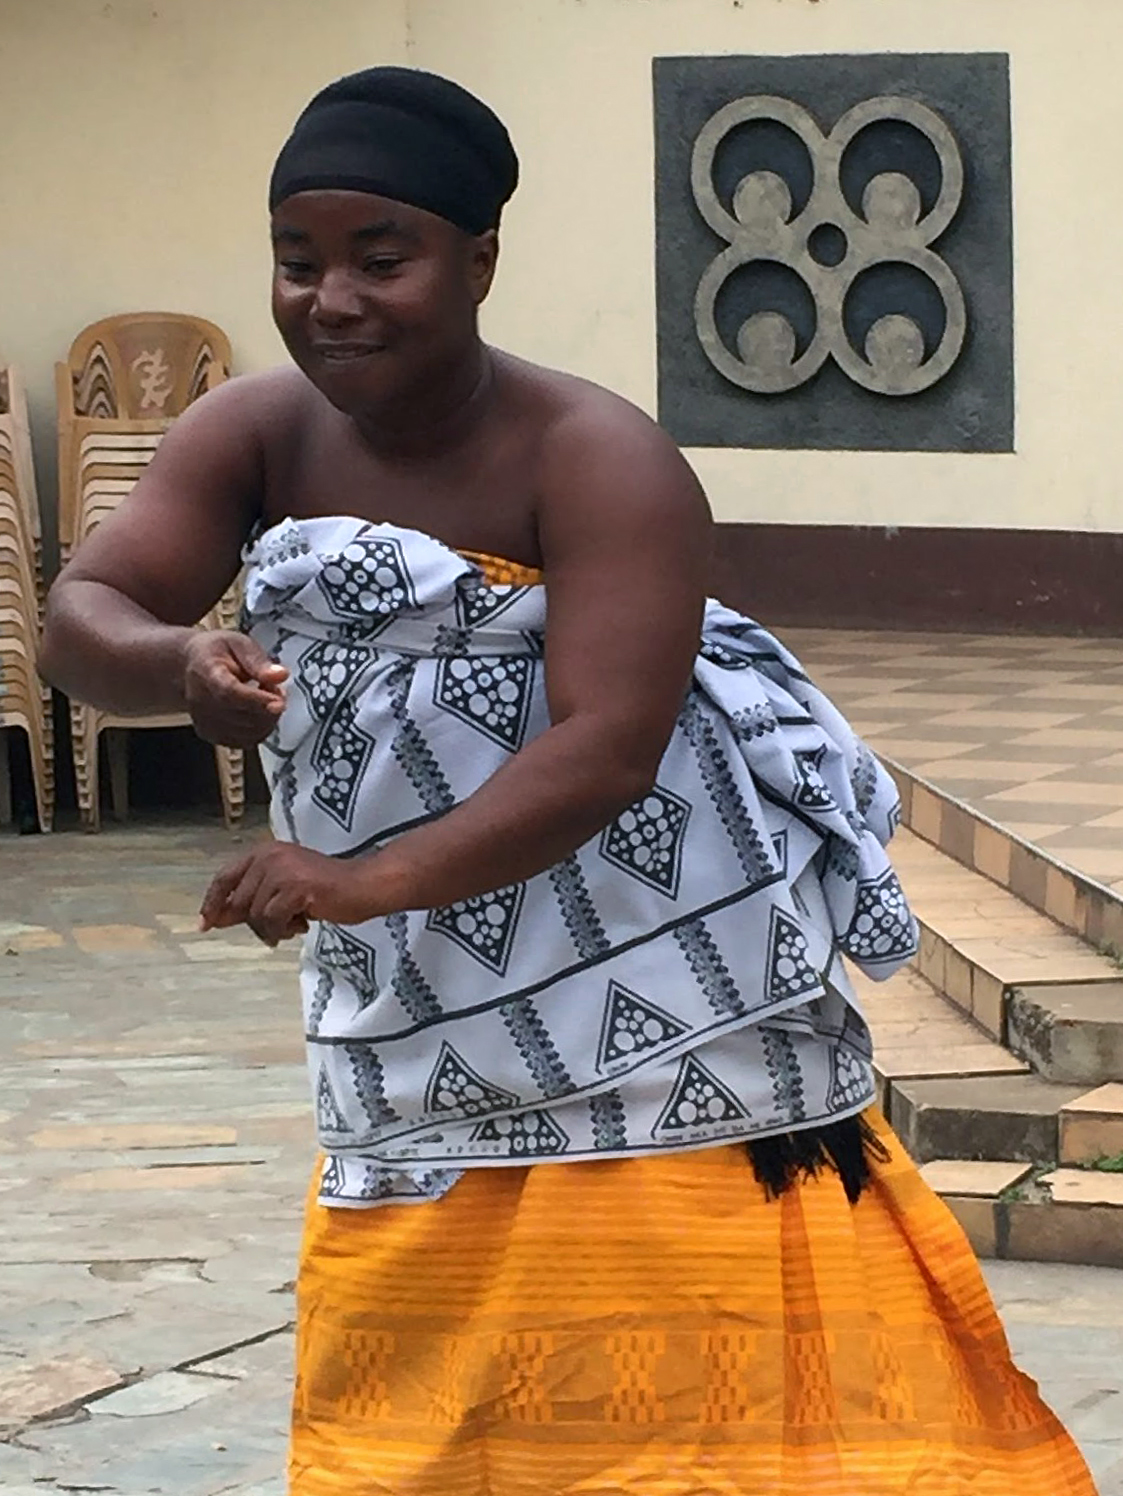 Dancer in kente cloth tapping fists, 2017, at the University of Ghana (photo: Peri Klemm)